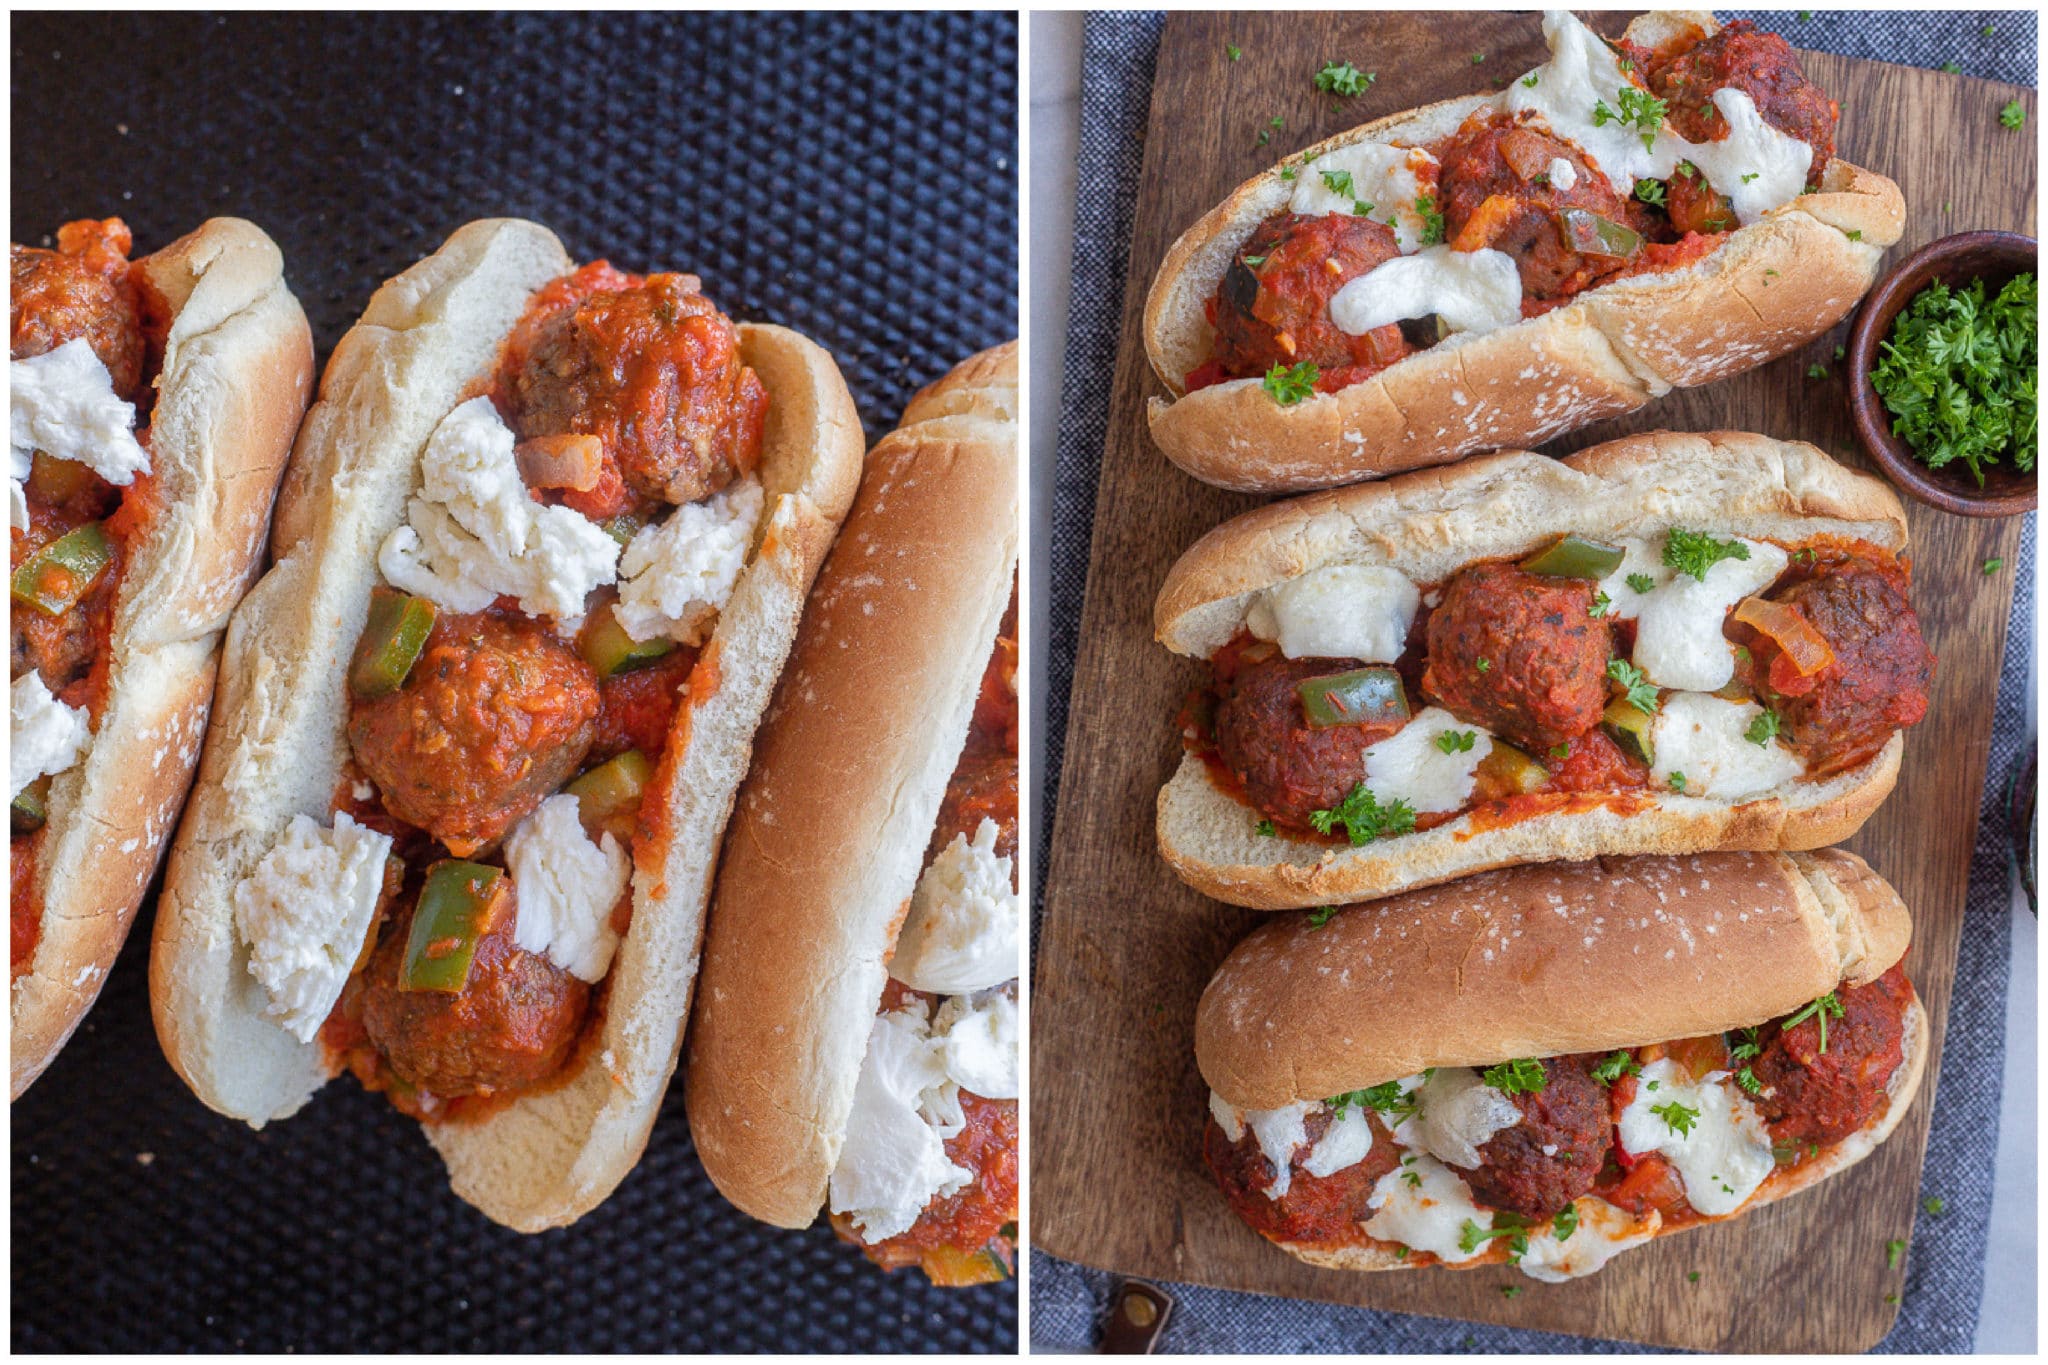 vegetarian meatball sandwiches before and after they are baked